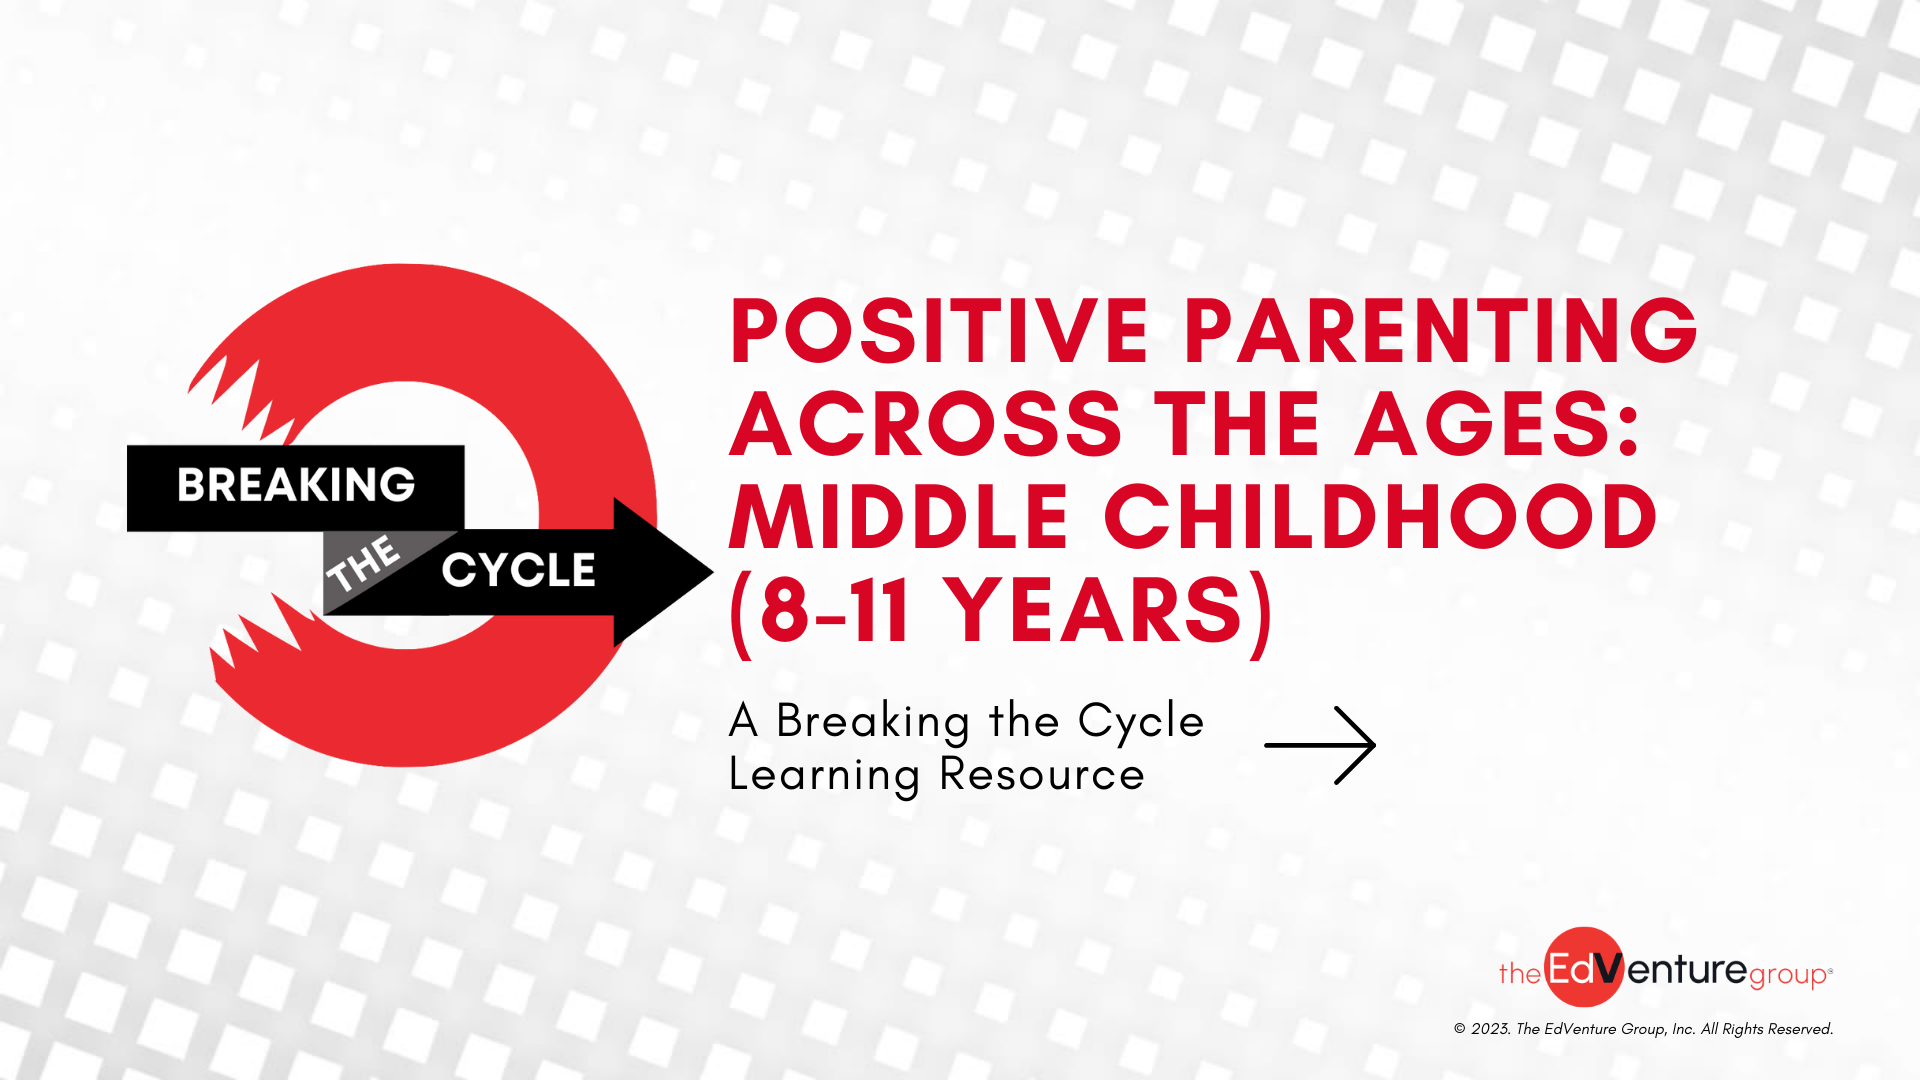 Middle Childhood (8-11 years) Positive Parenting Across the Ages